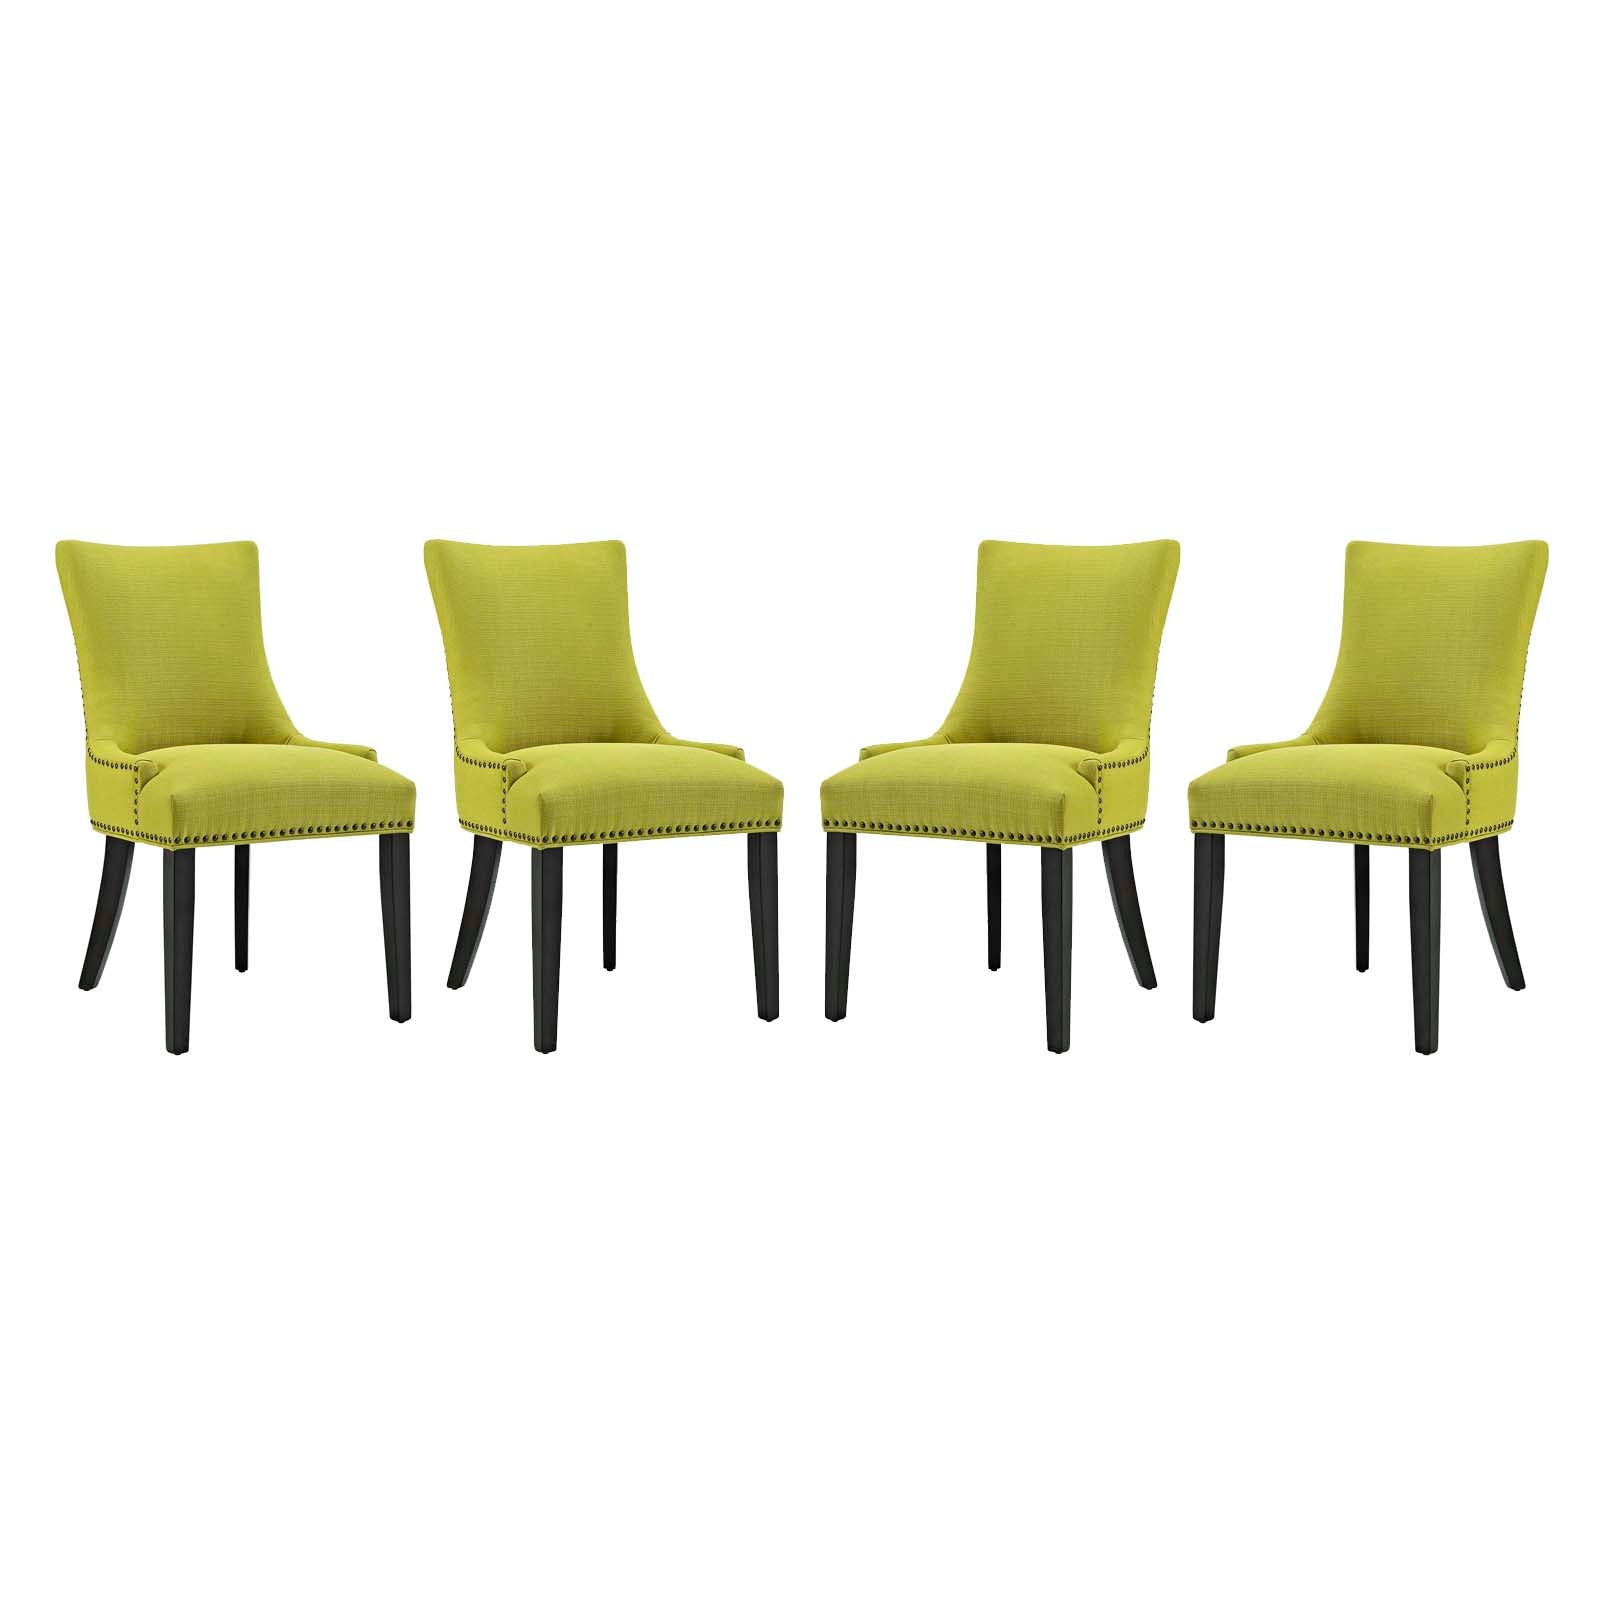 Modway Dining Chairs - Marquis Dining Chair Fabric Wheatgrass (Set of 4)